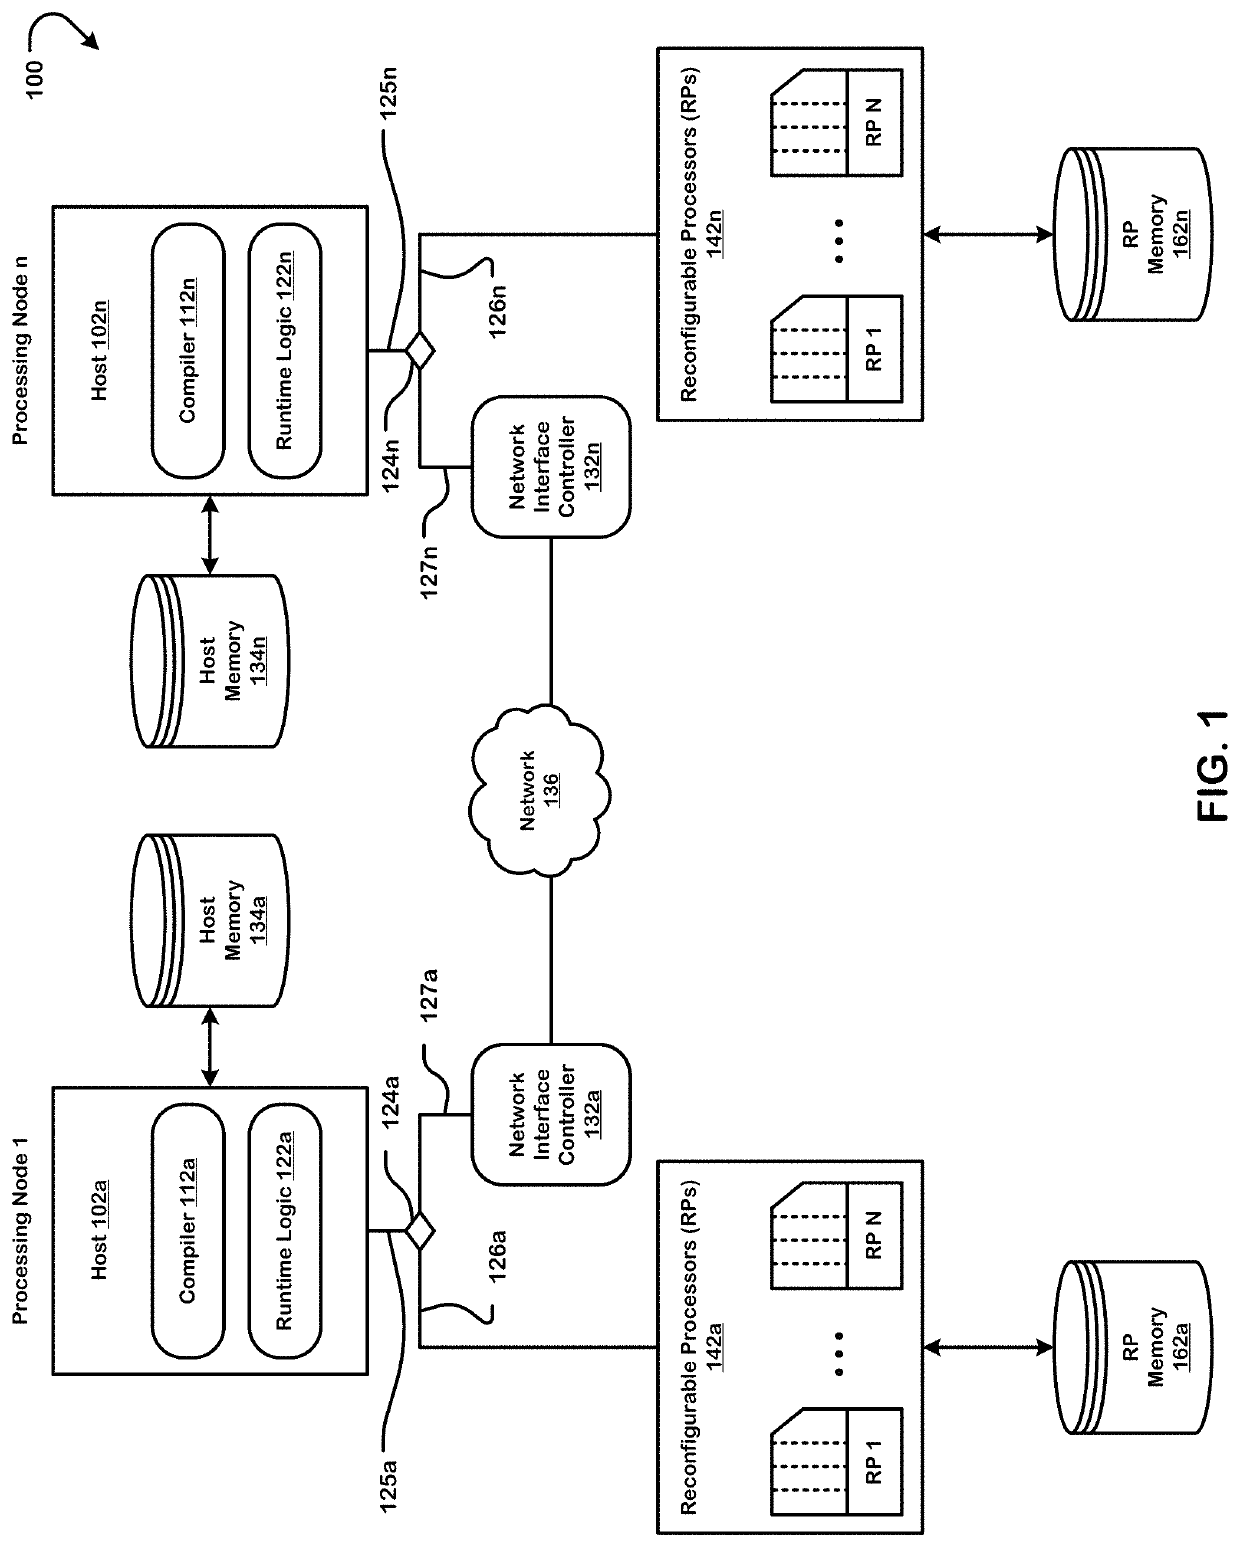 Executing a neural network graph using a non-homogenous set of reconfigurable processors